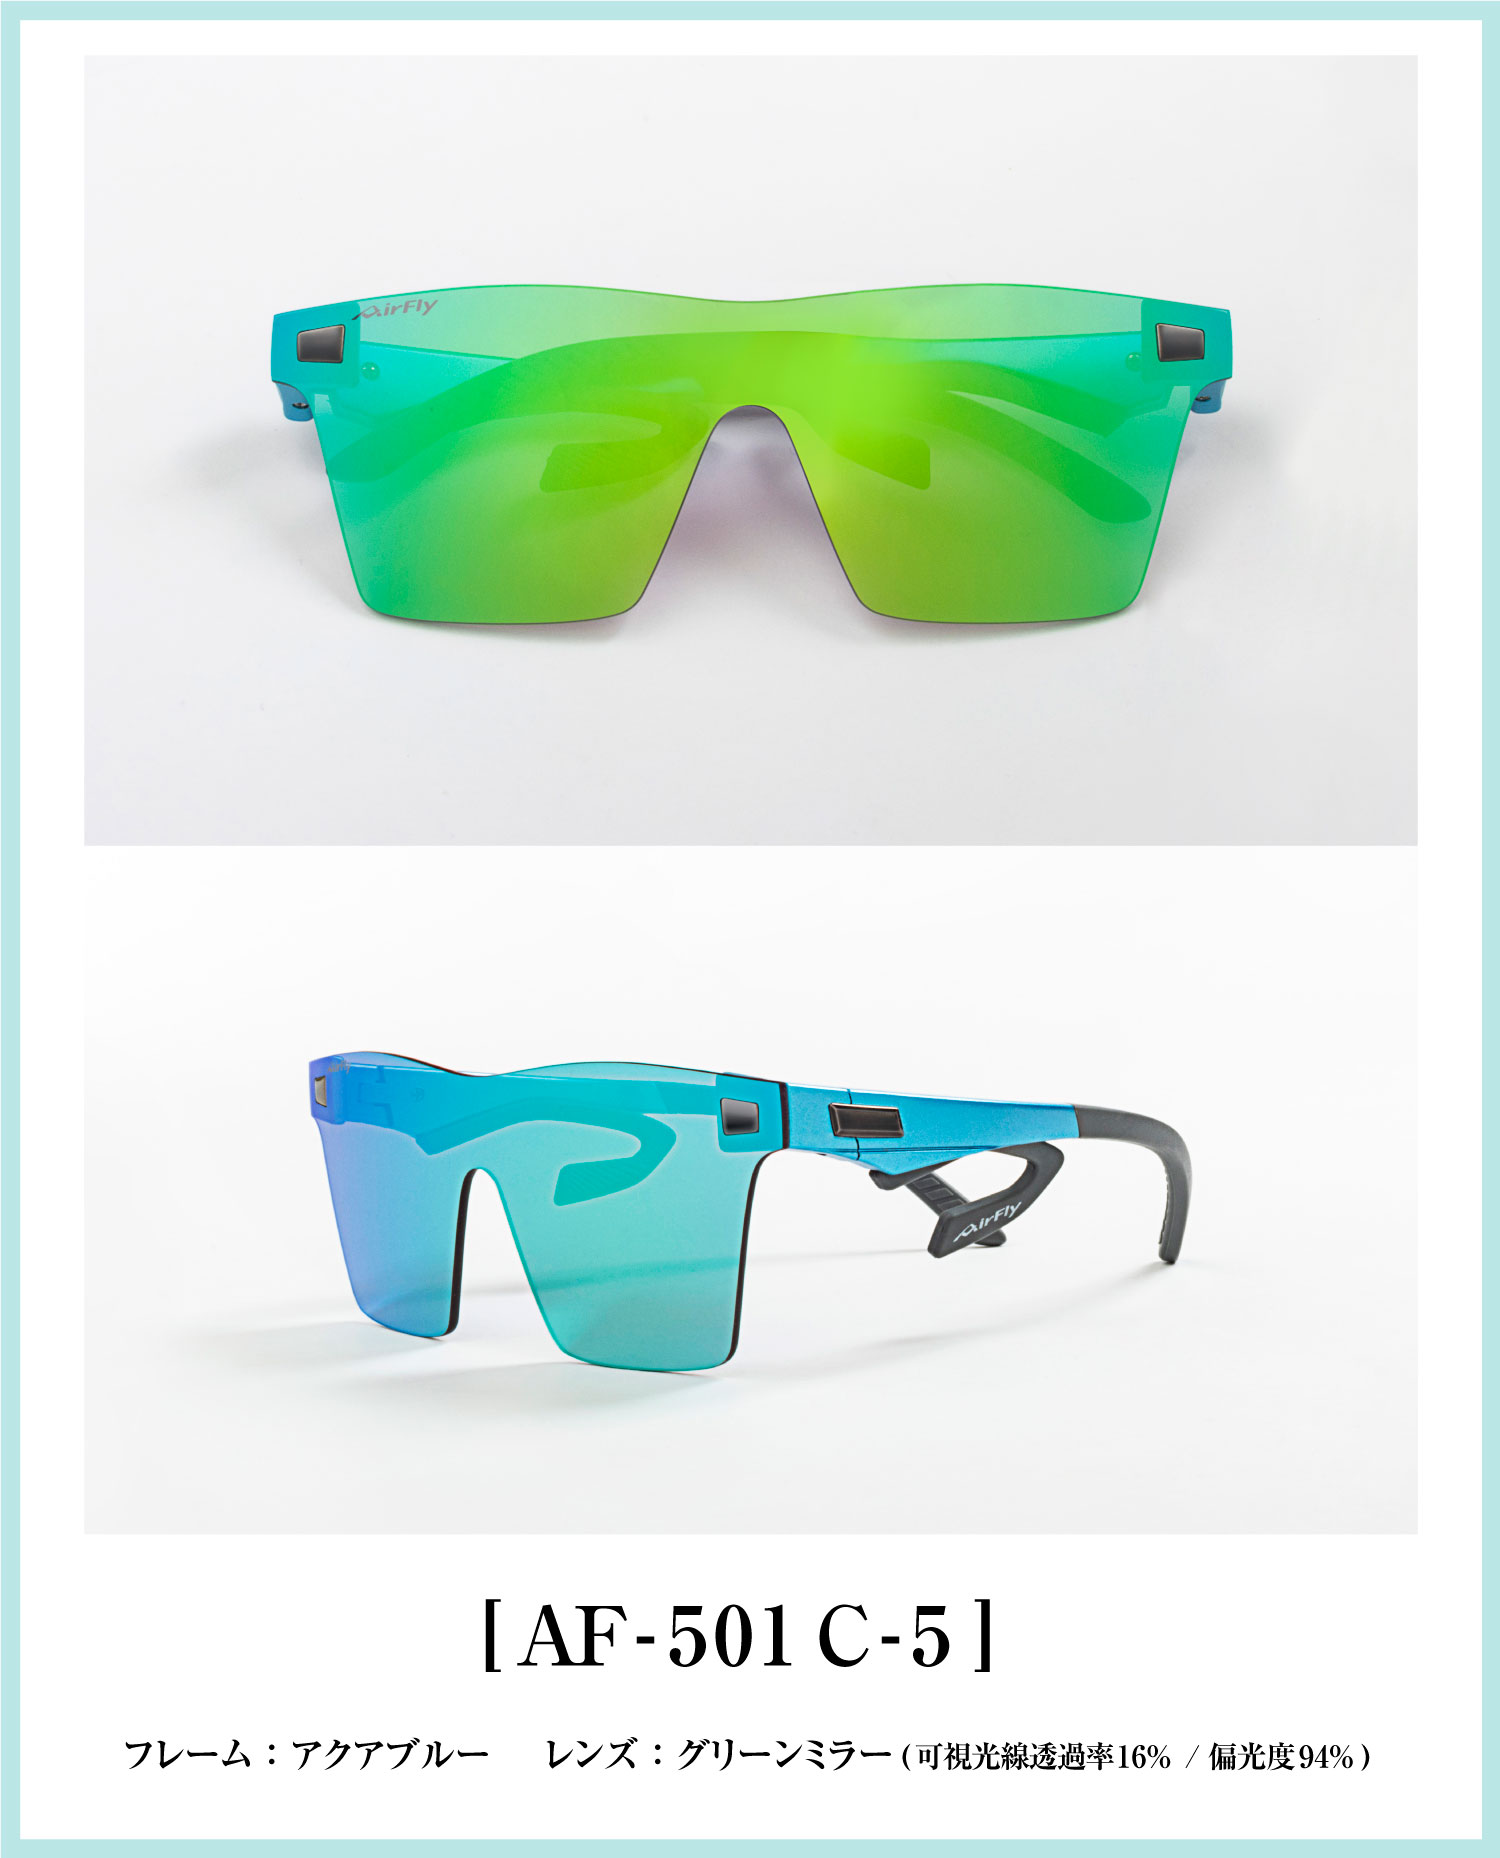 AF-501 C-5 sports-casual sunglasses AirFly